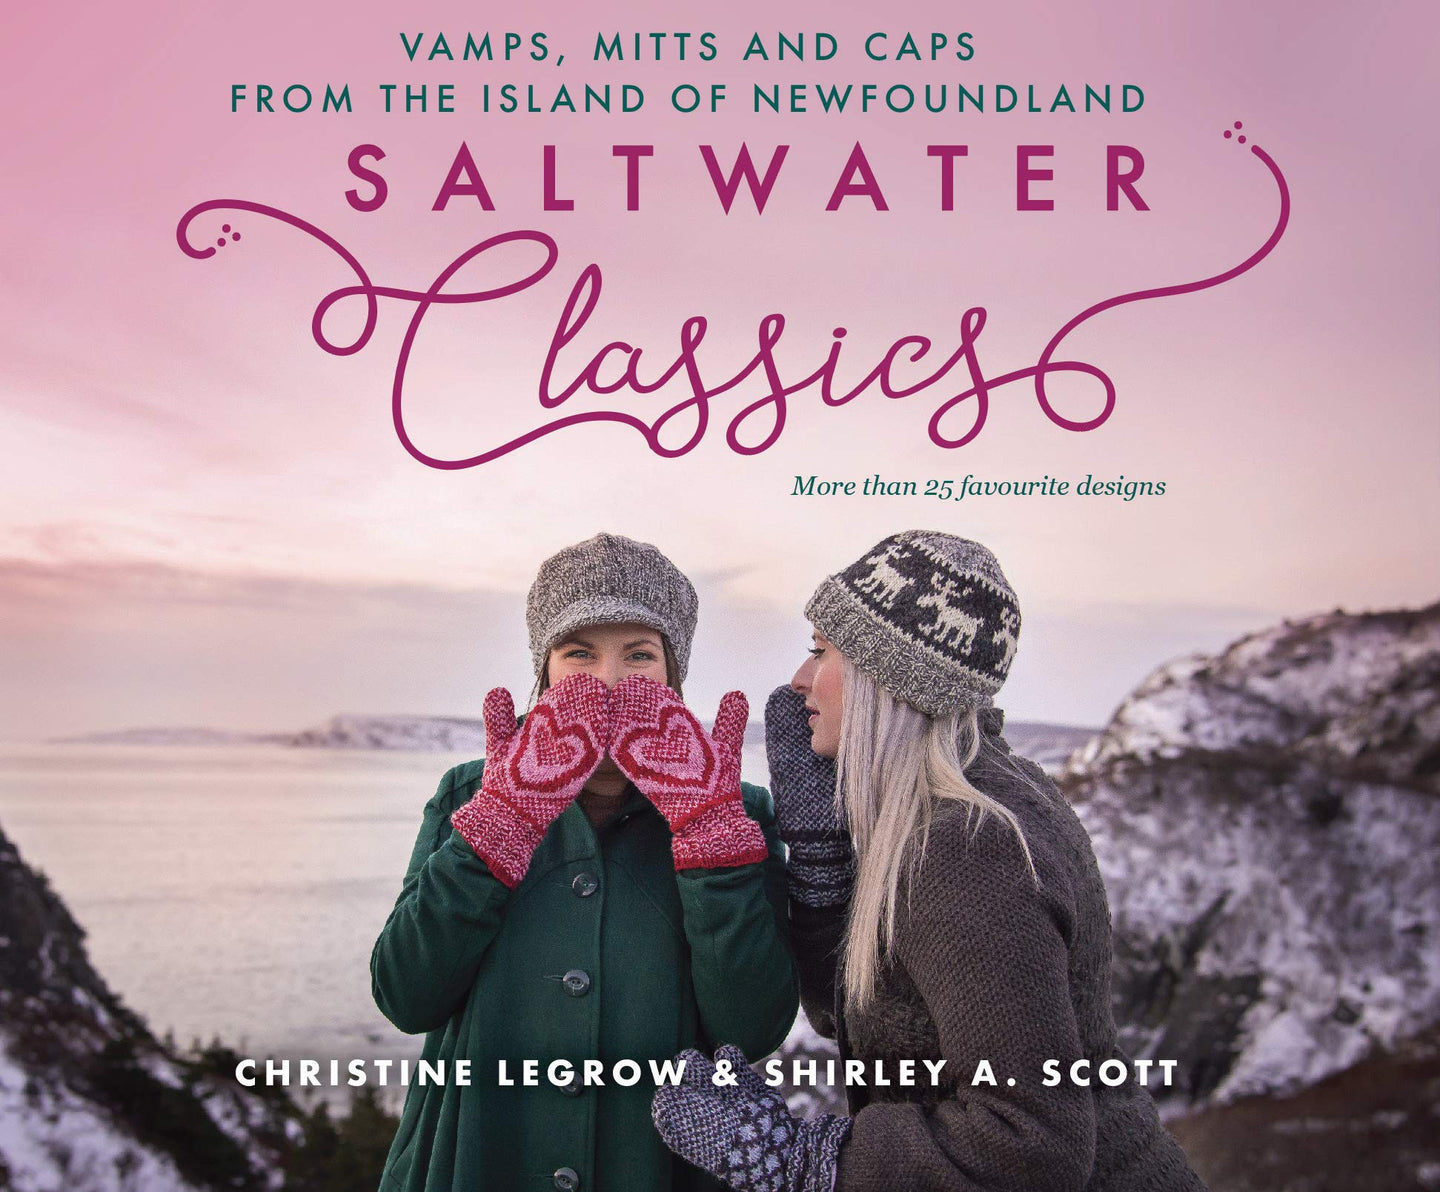 Saltwater Classics From the Island of Newfoundland